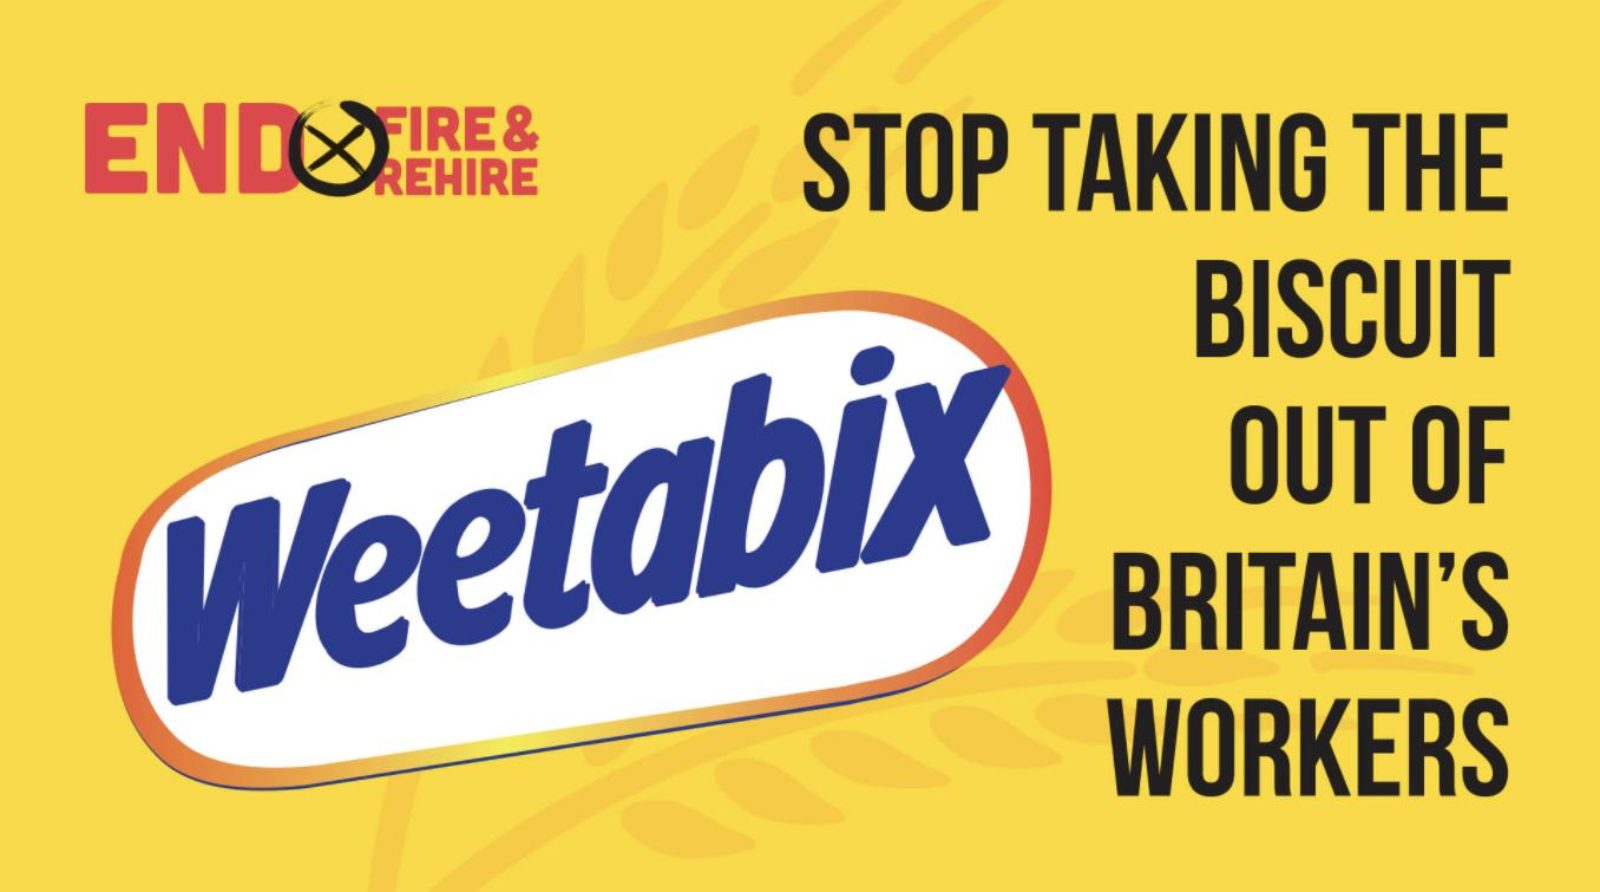 Image shows a Weetabix box with the words 